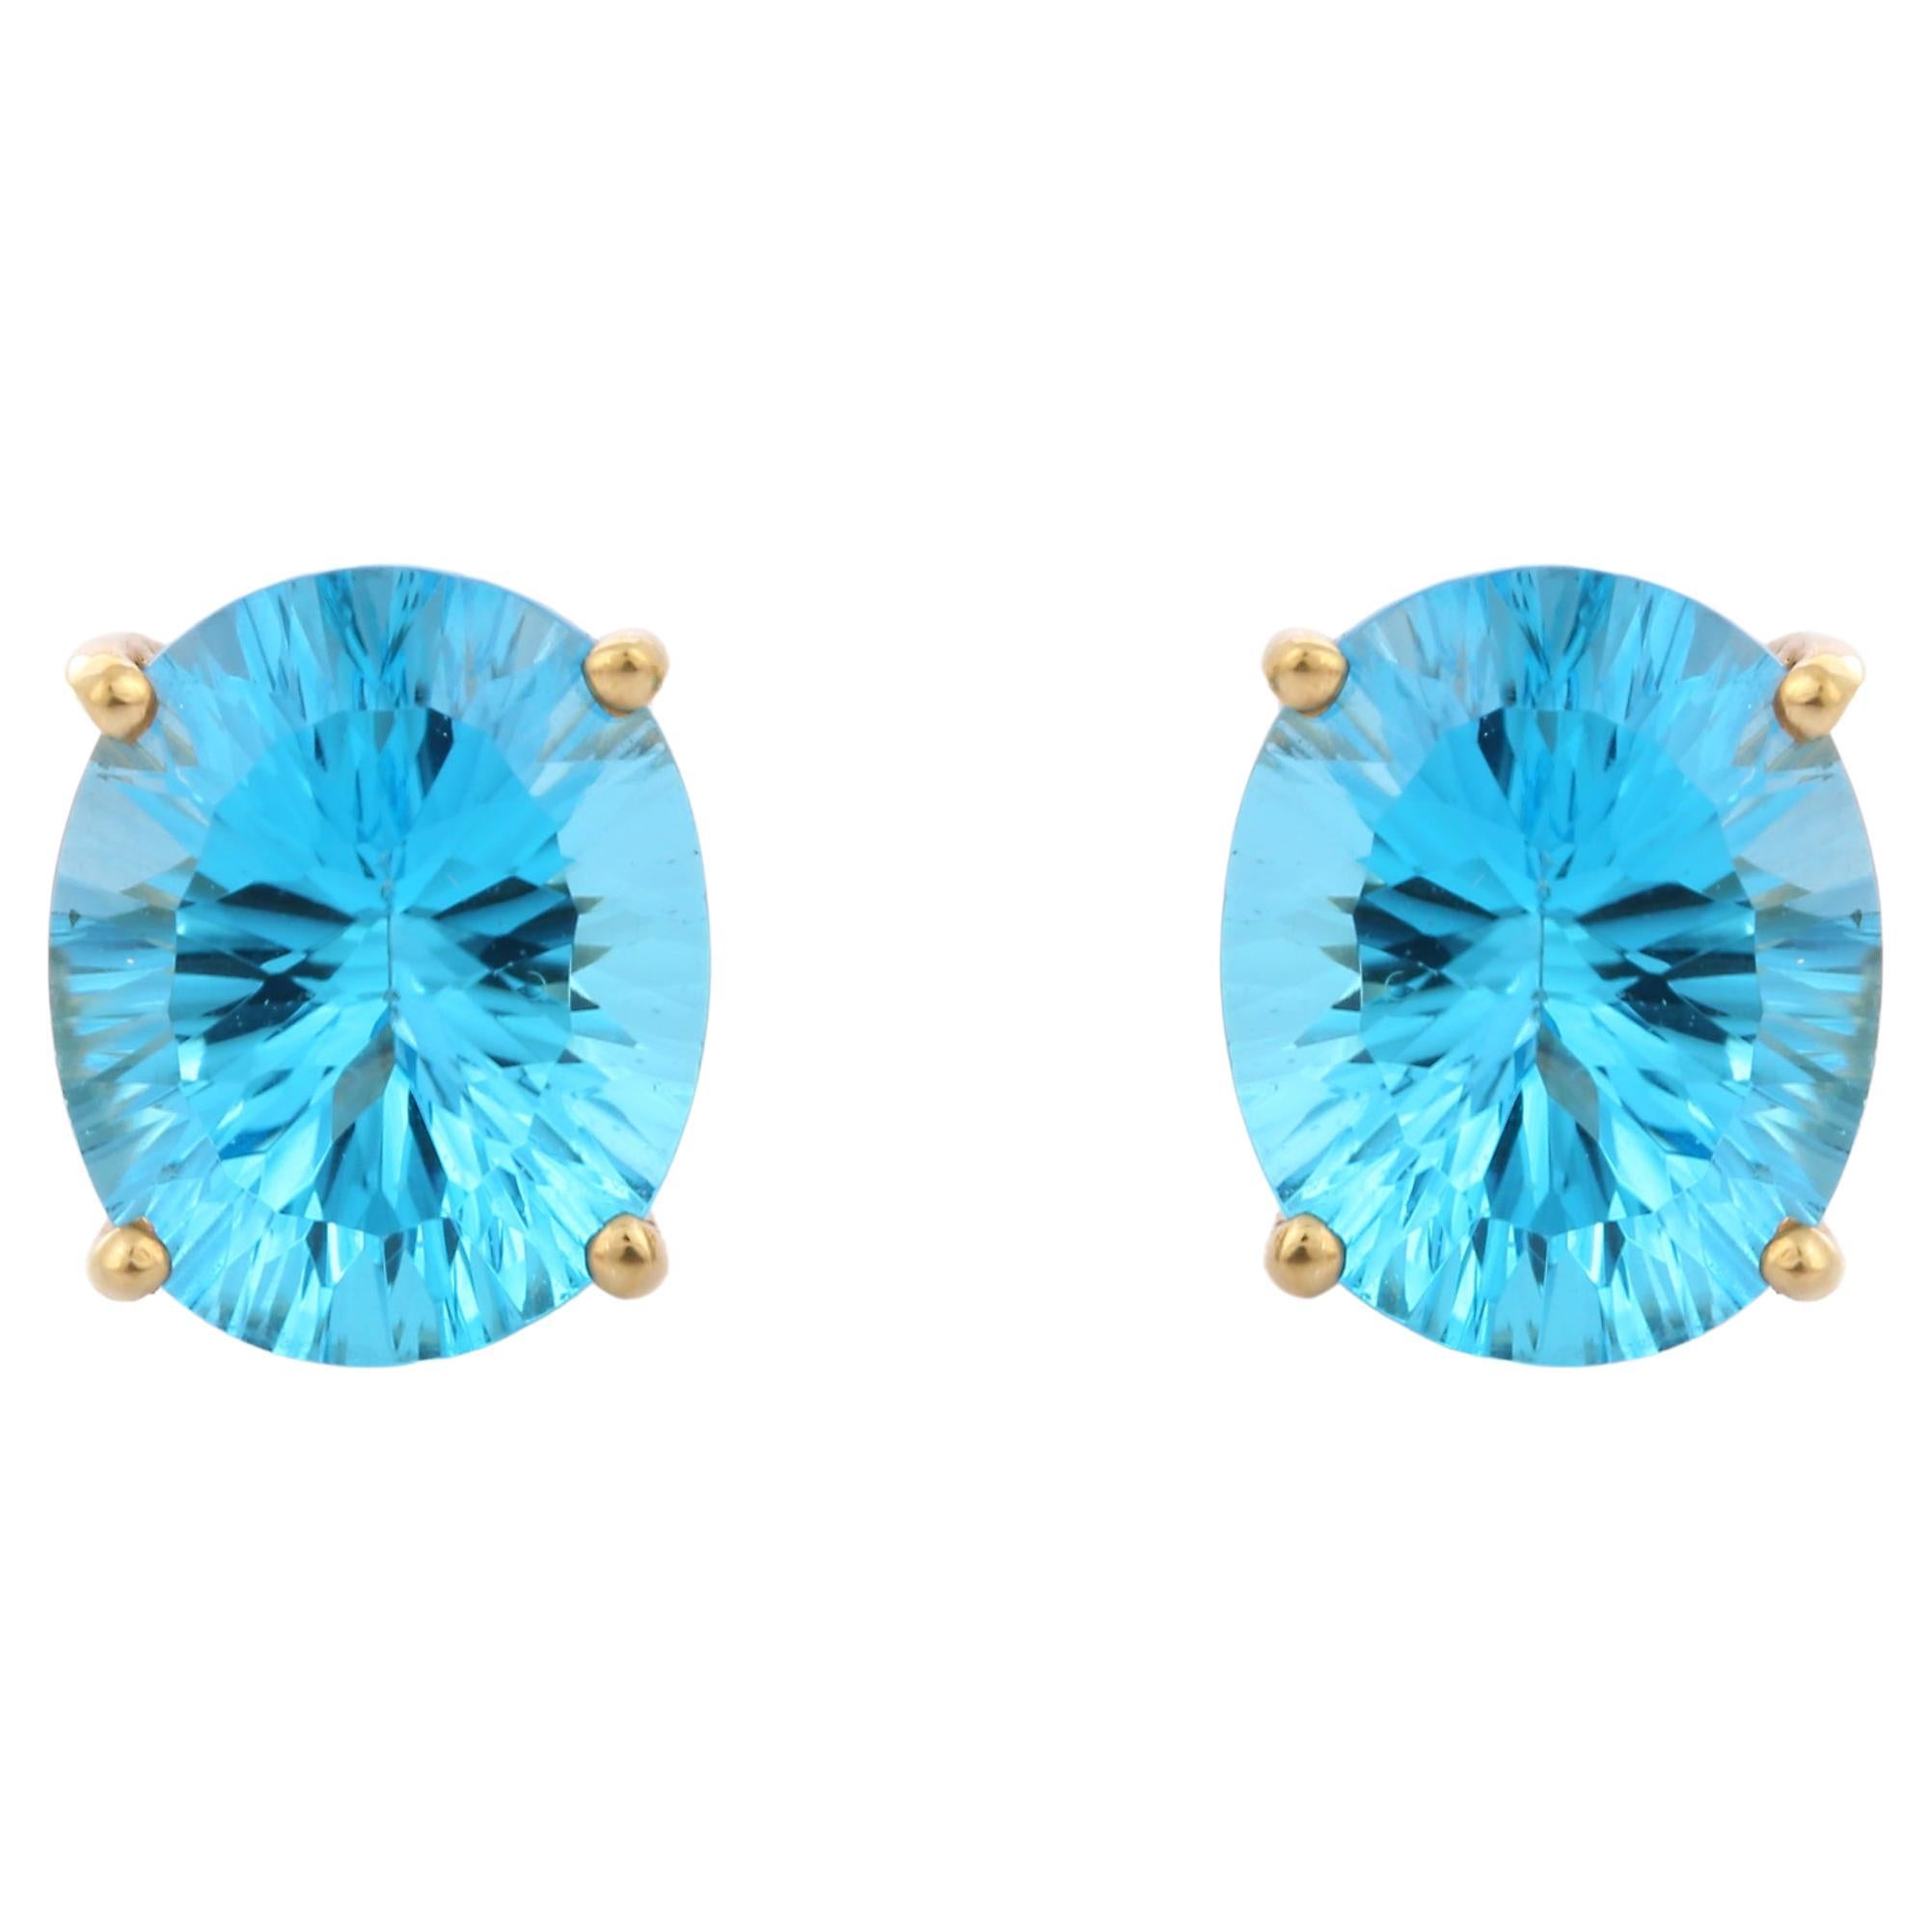 11 Ct Natural Blue Topaz Solitaire Stud Earrings Everyday Earrings in 10K Gold For Sale